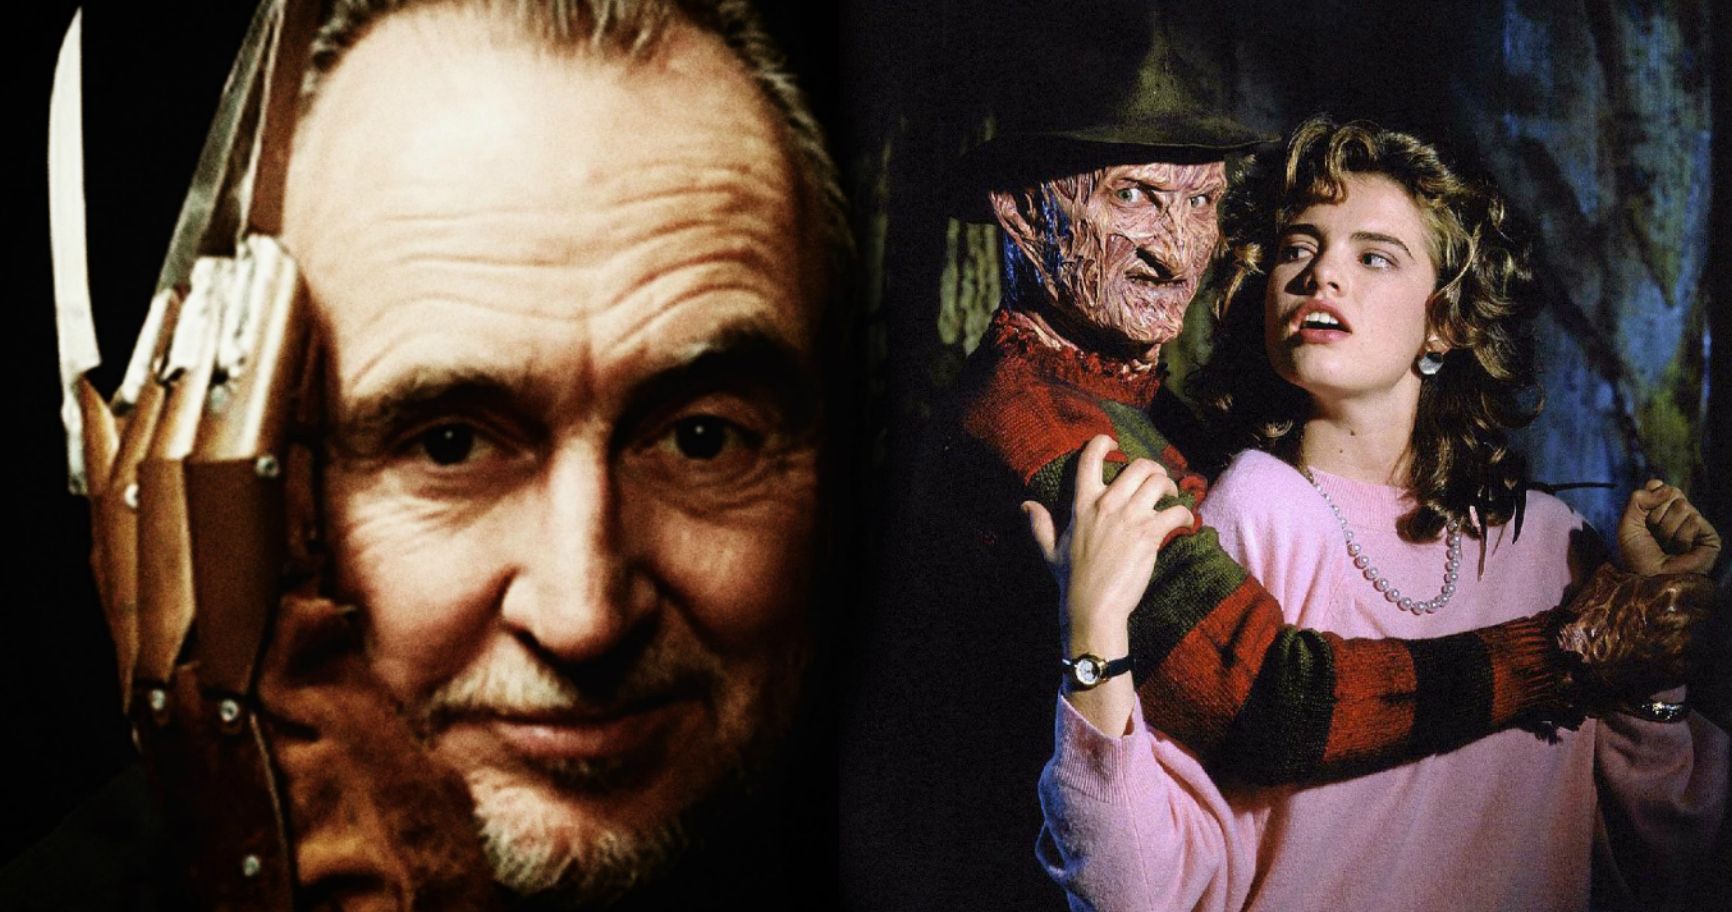 Wes Craven Remembered by Horror Fans on What Would Have Been His 81st Birthday